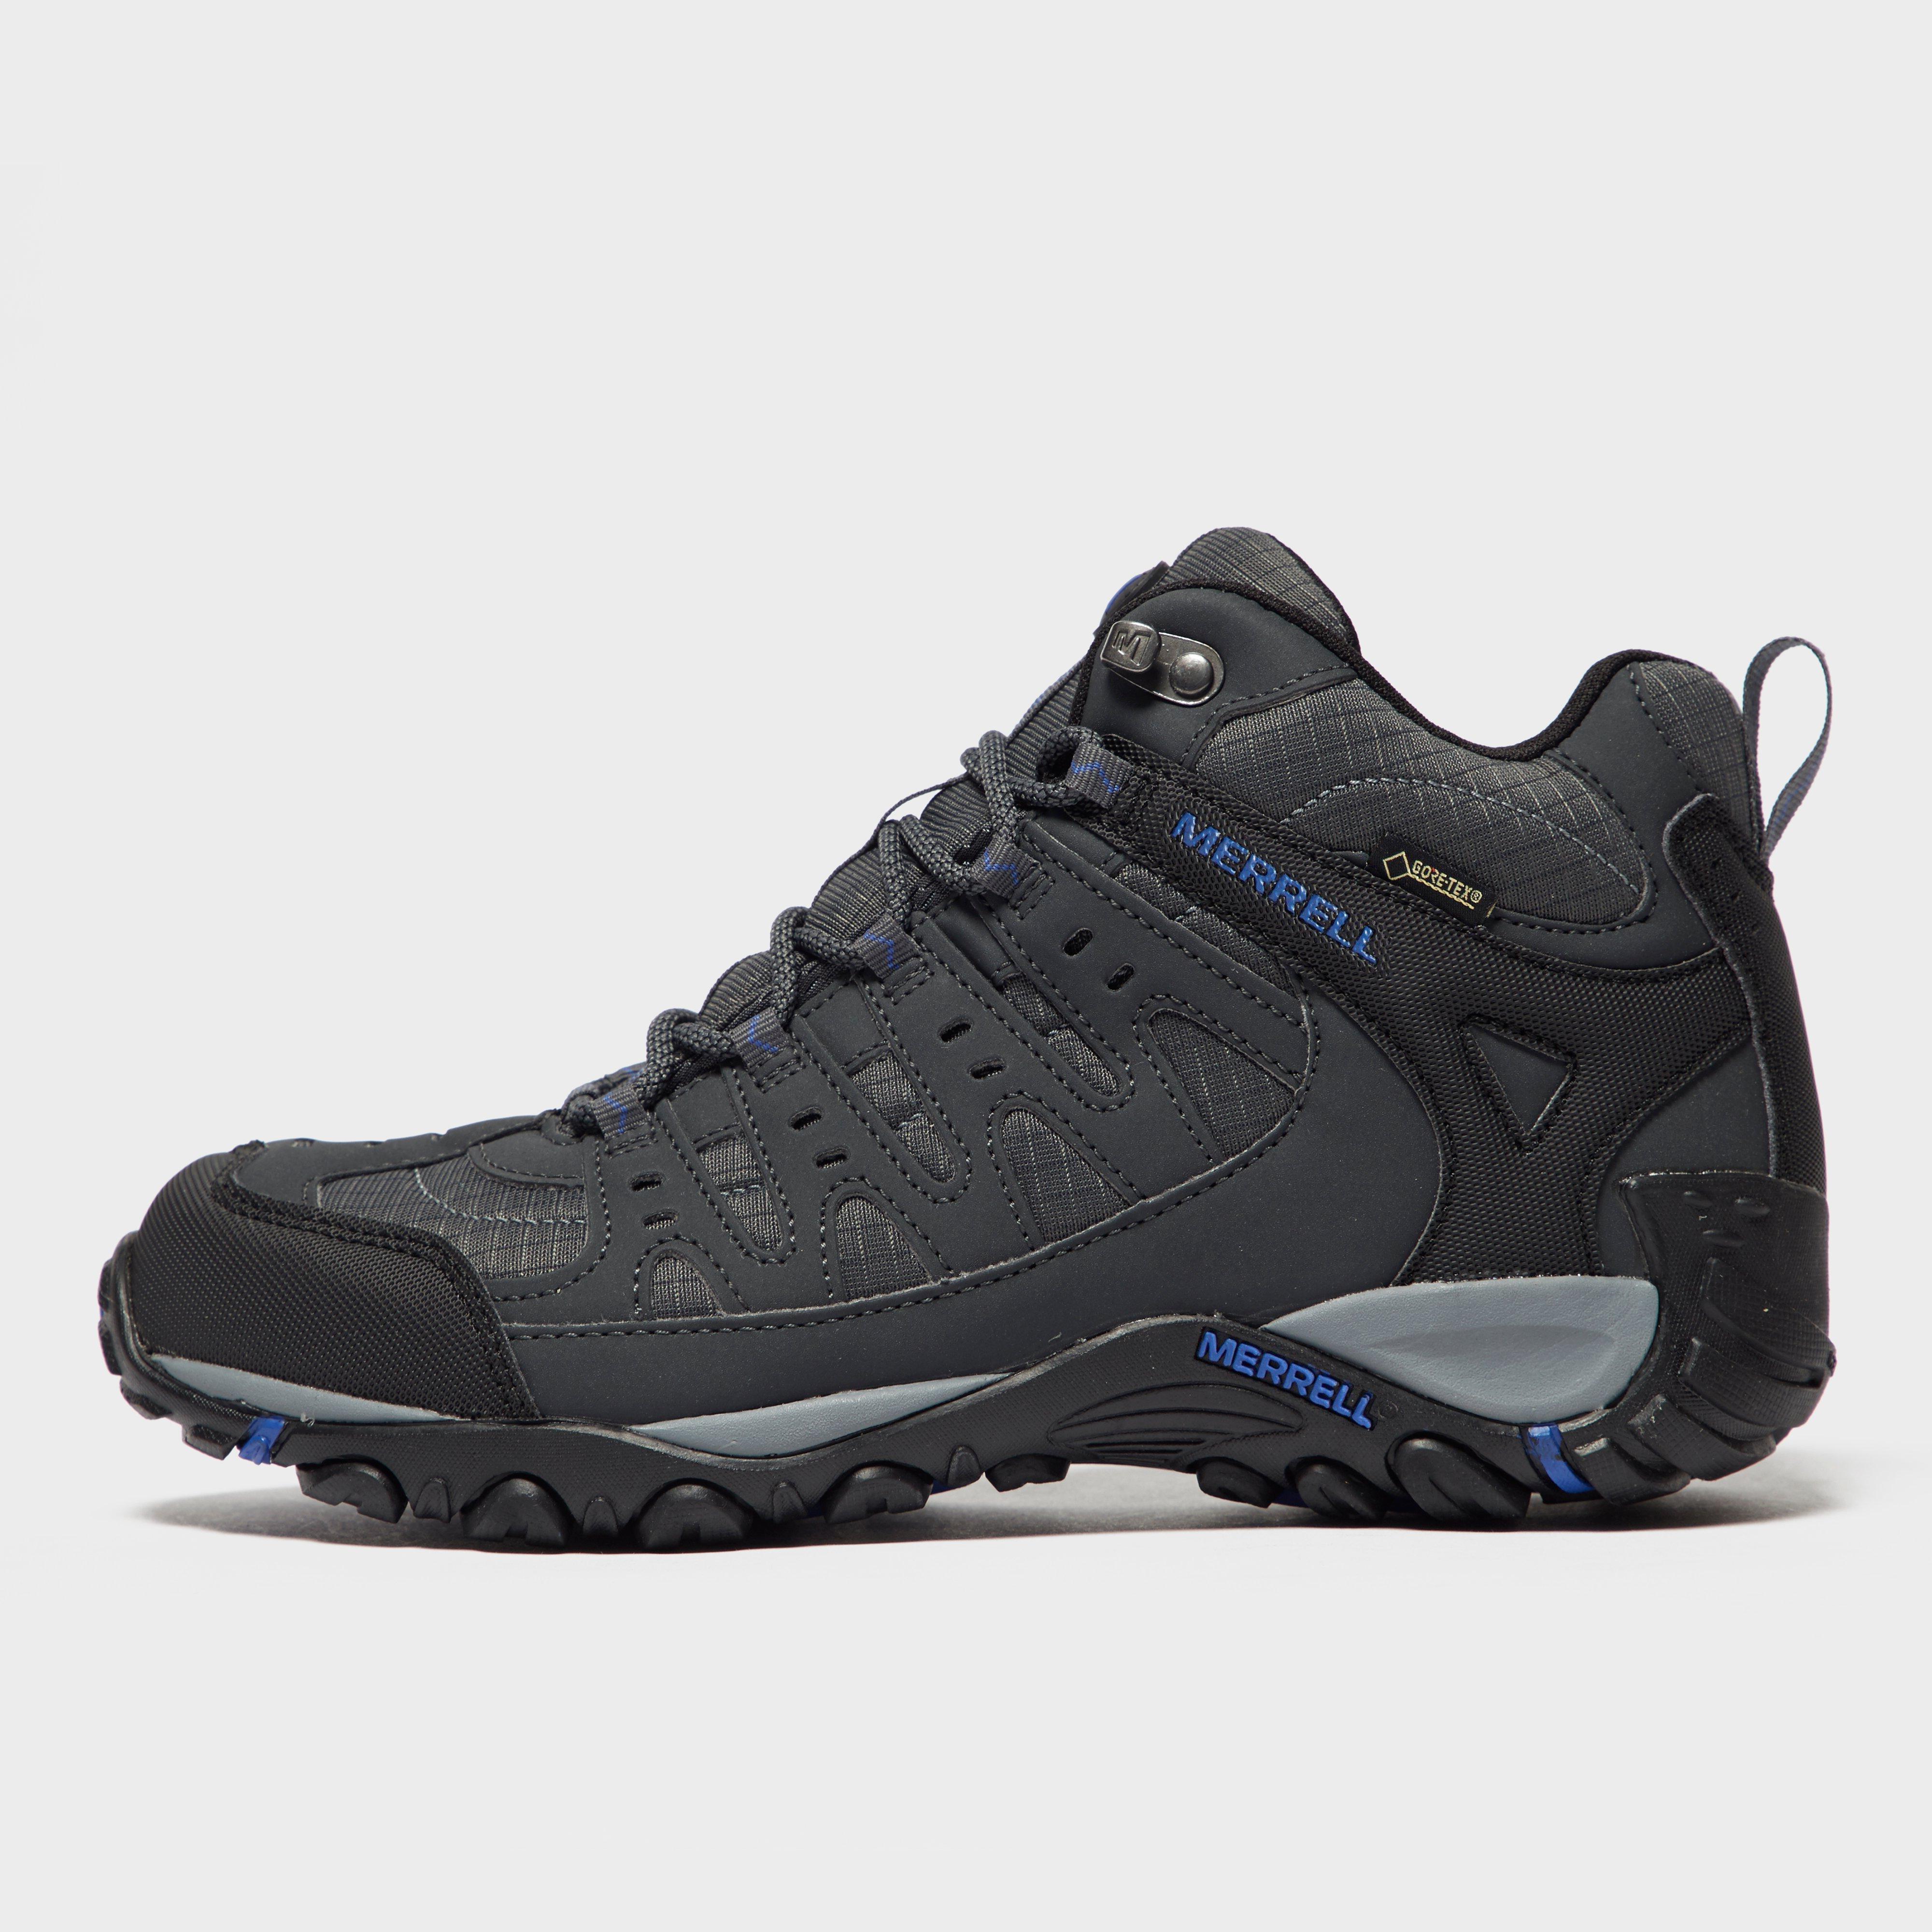 Accentor GORE-TEX® Mid Boots | Millets